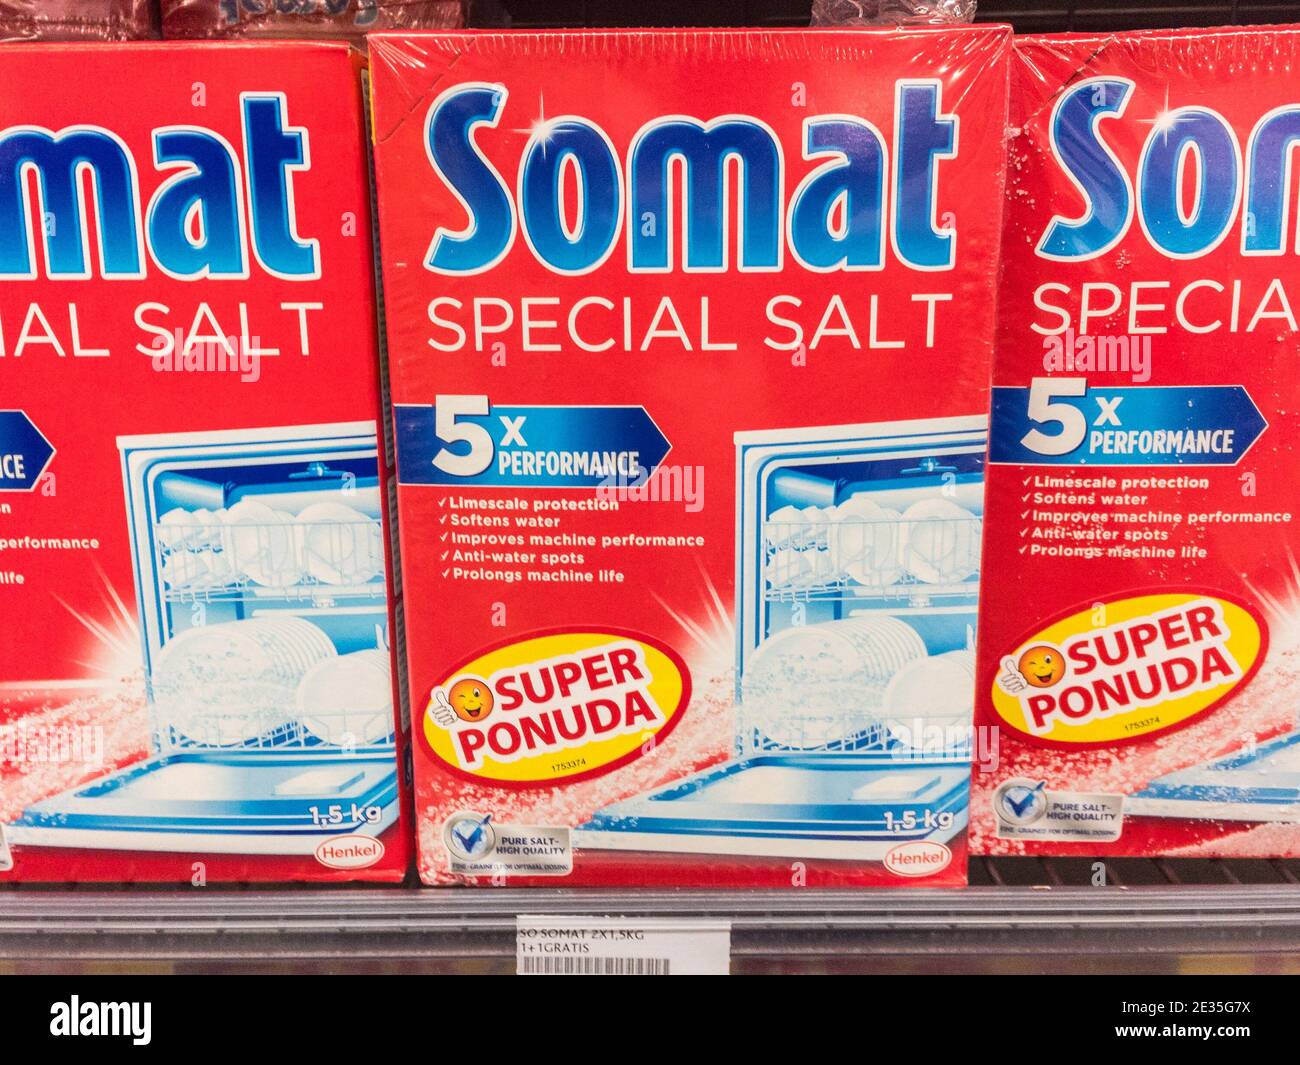 BELGRADE, SERBIA - JANUARY 10, 2021: Somat logo on boxes of dishawasher cleaning detergent tablets for sale. Somat, part of Henkel, is a brand of hous Stock Photo